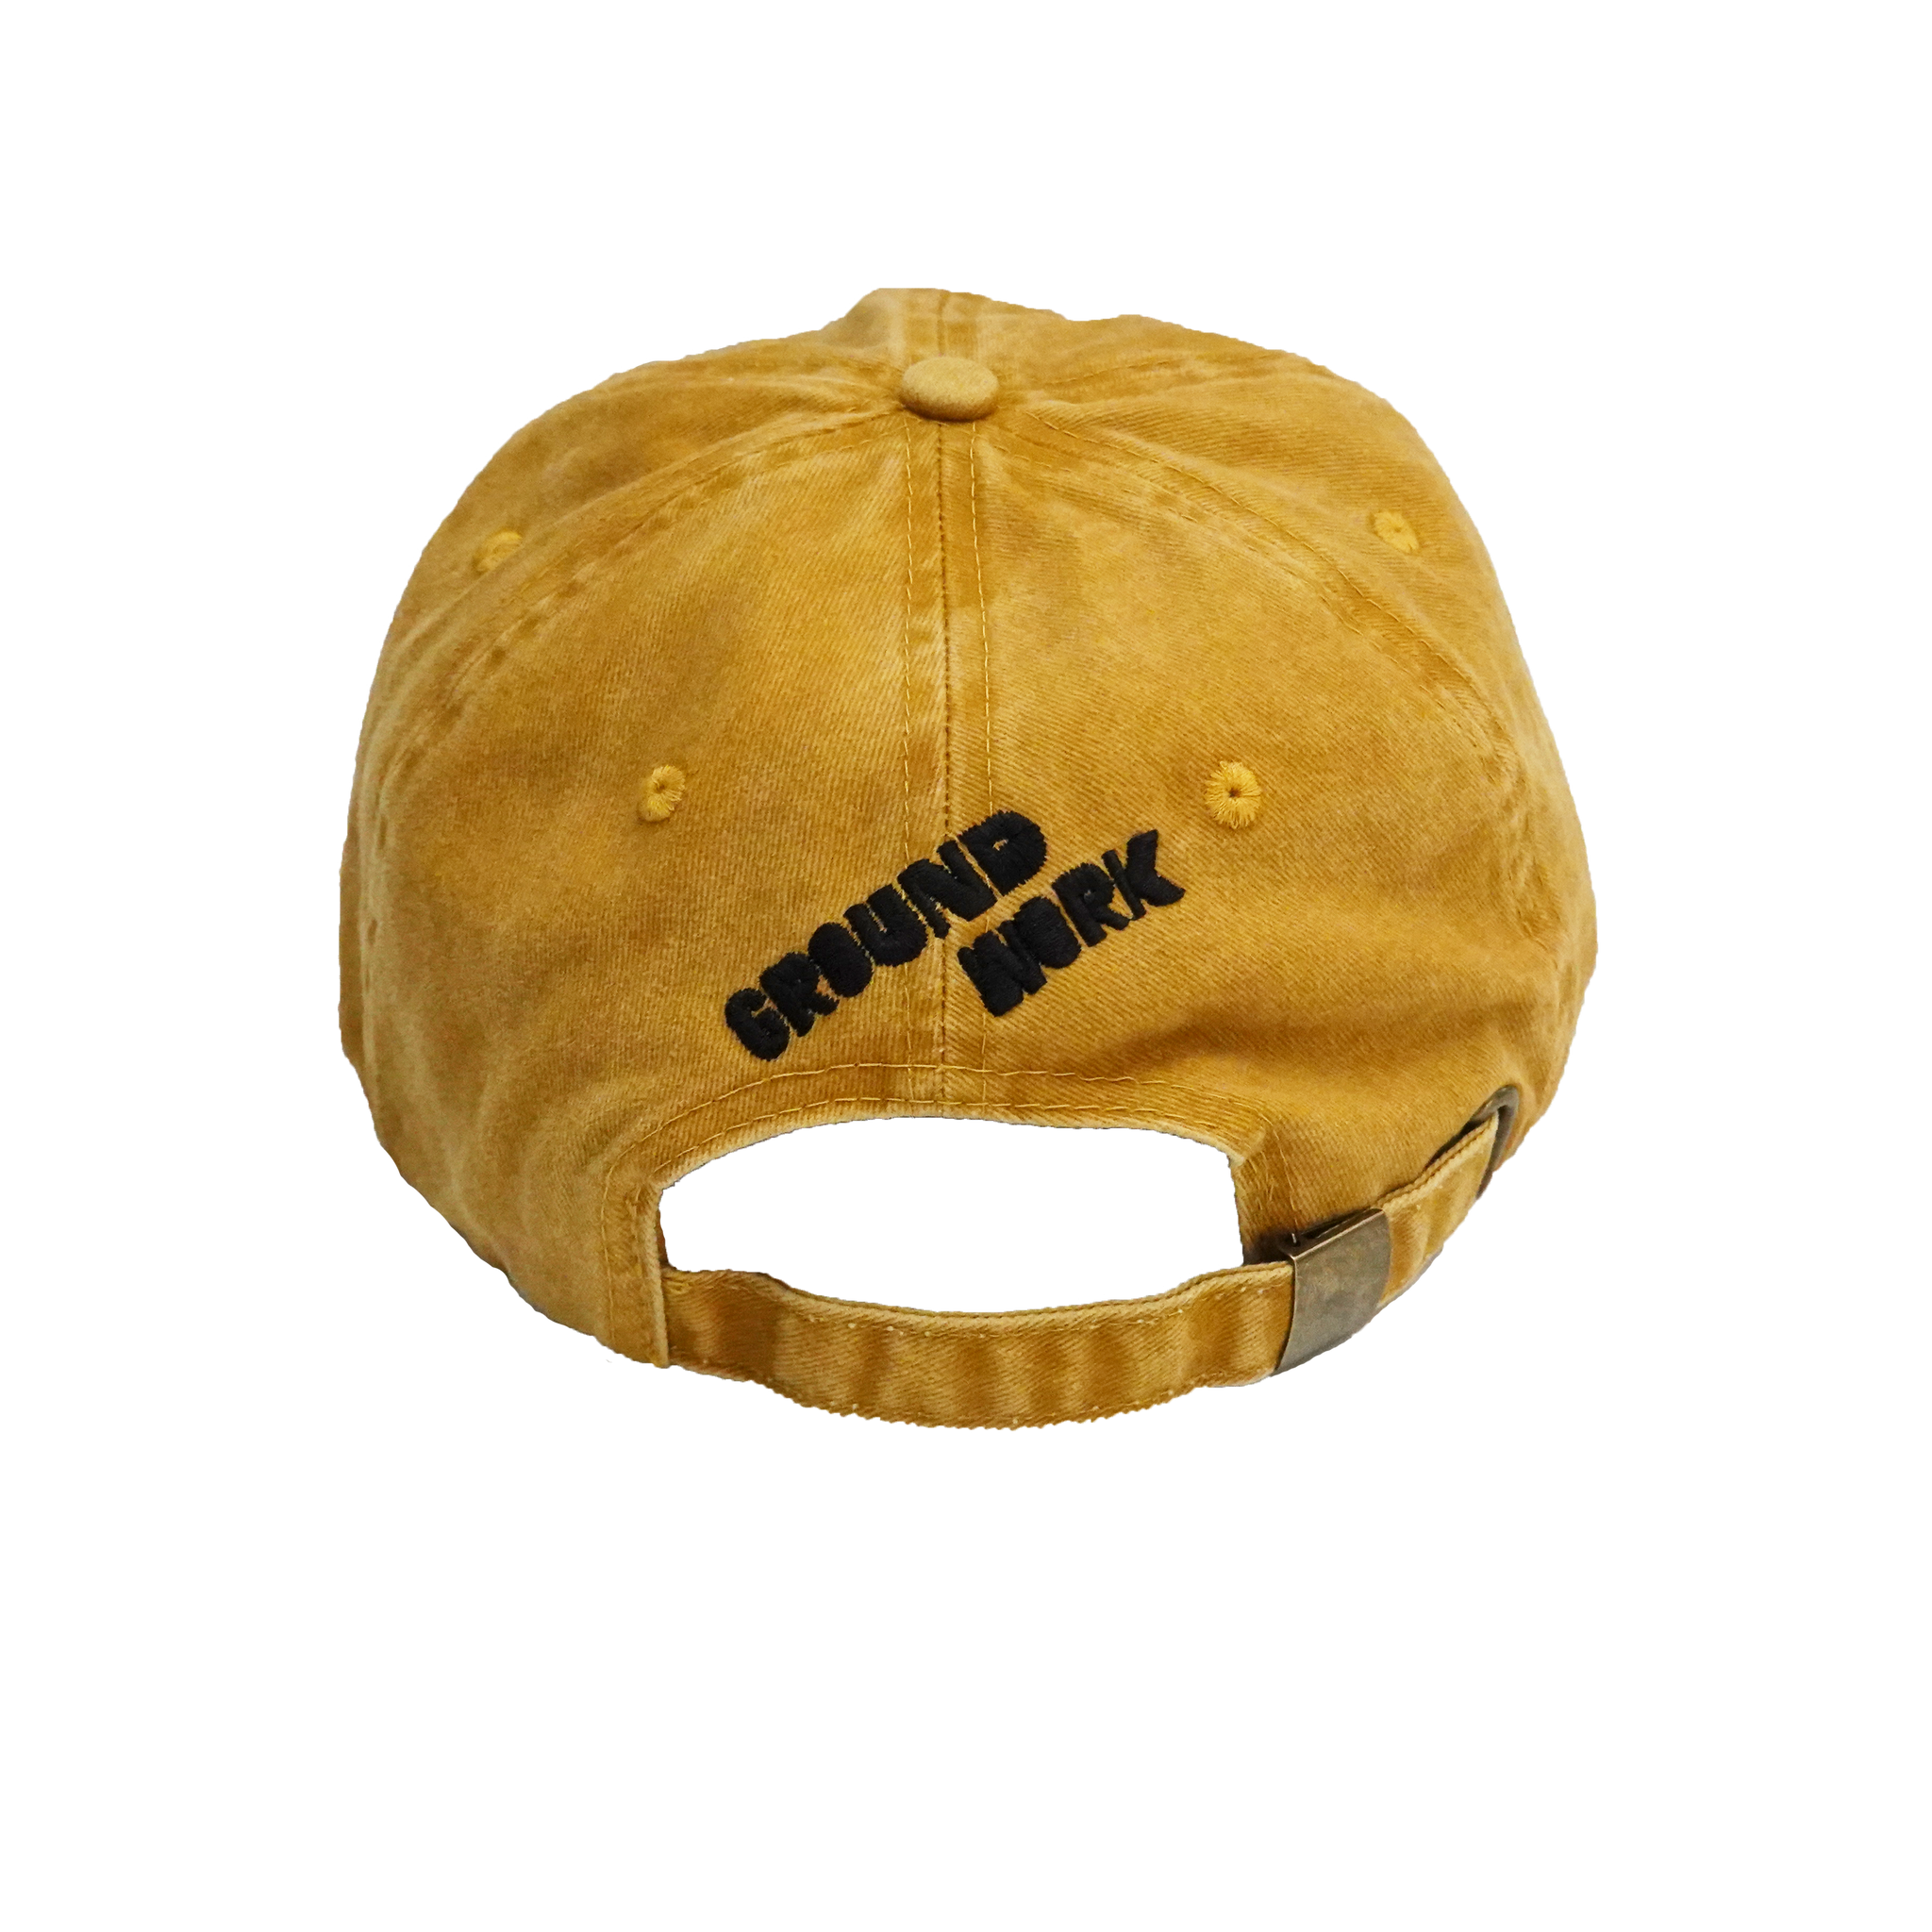 Groundwork unstructured 6-panel cotton hat in marigold with embroidered Groundwork Stacked logo on back of hat